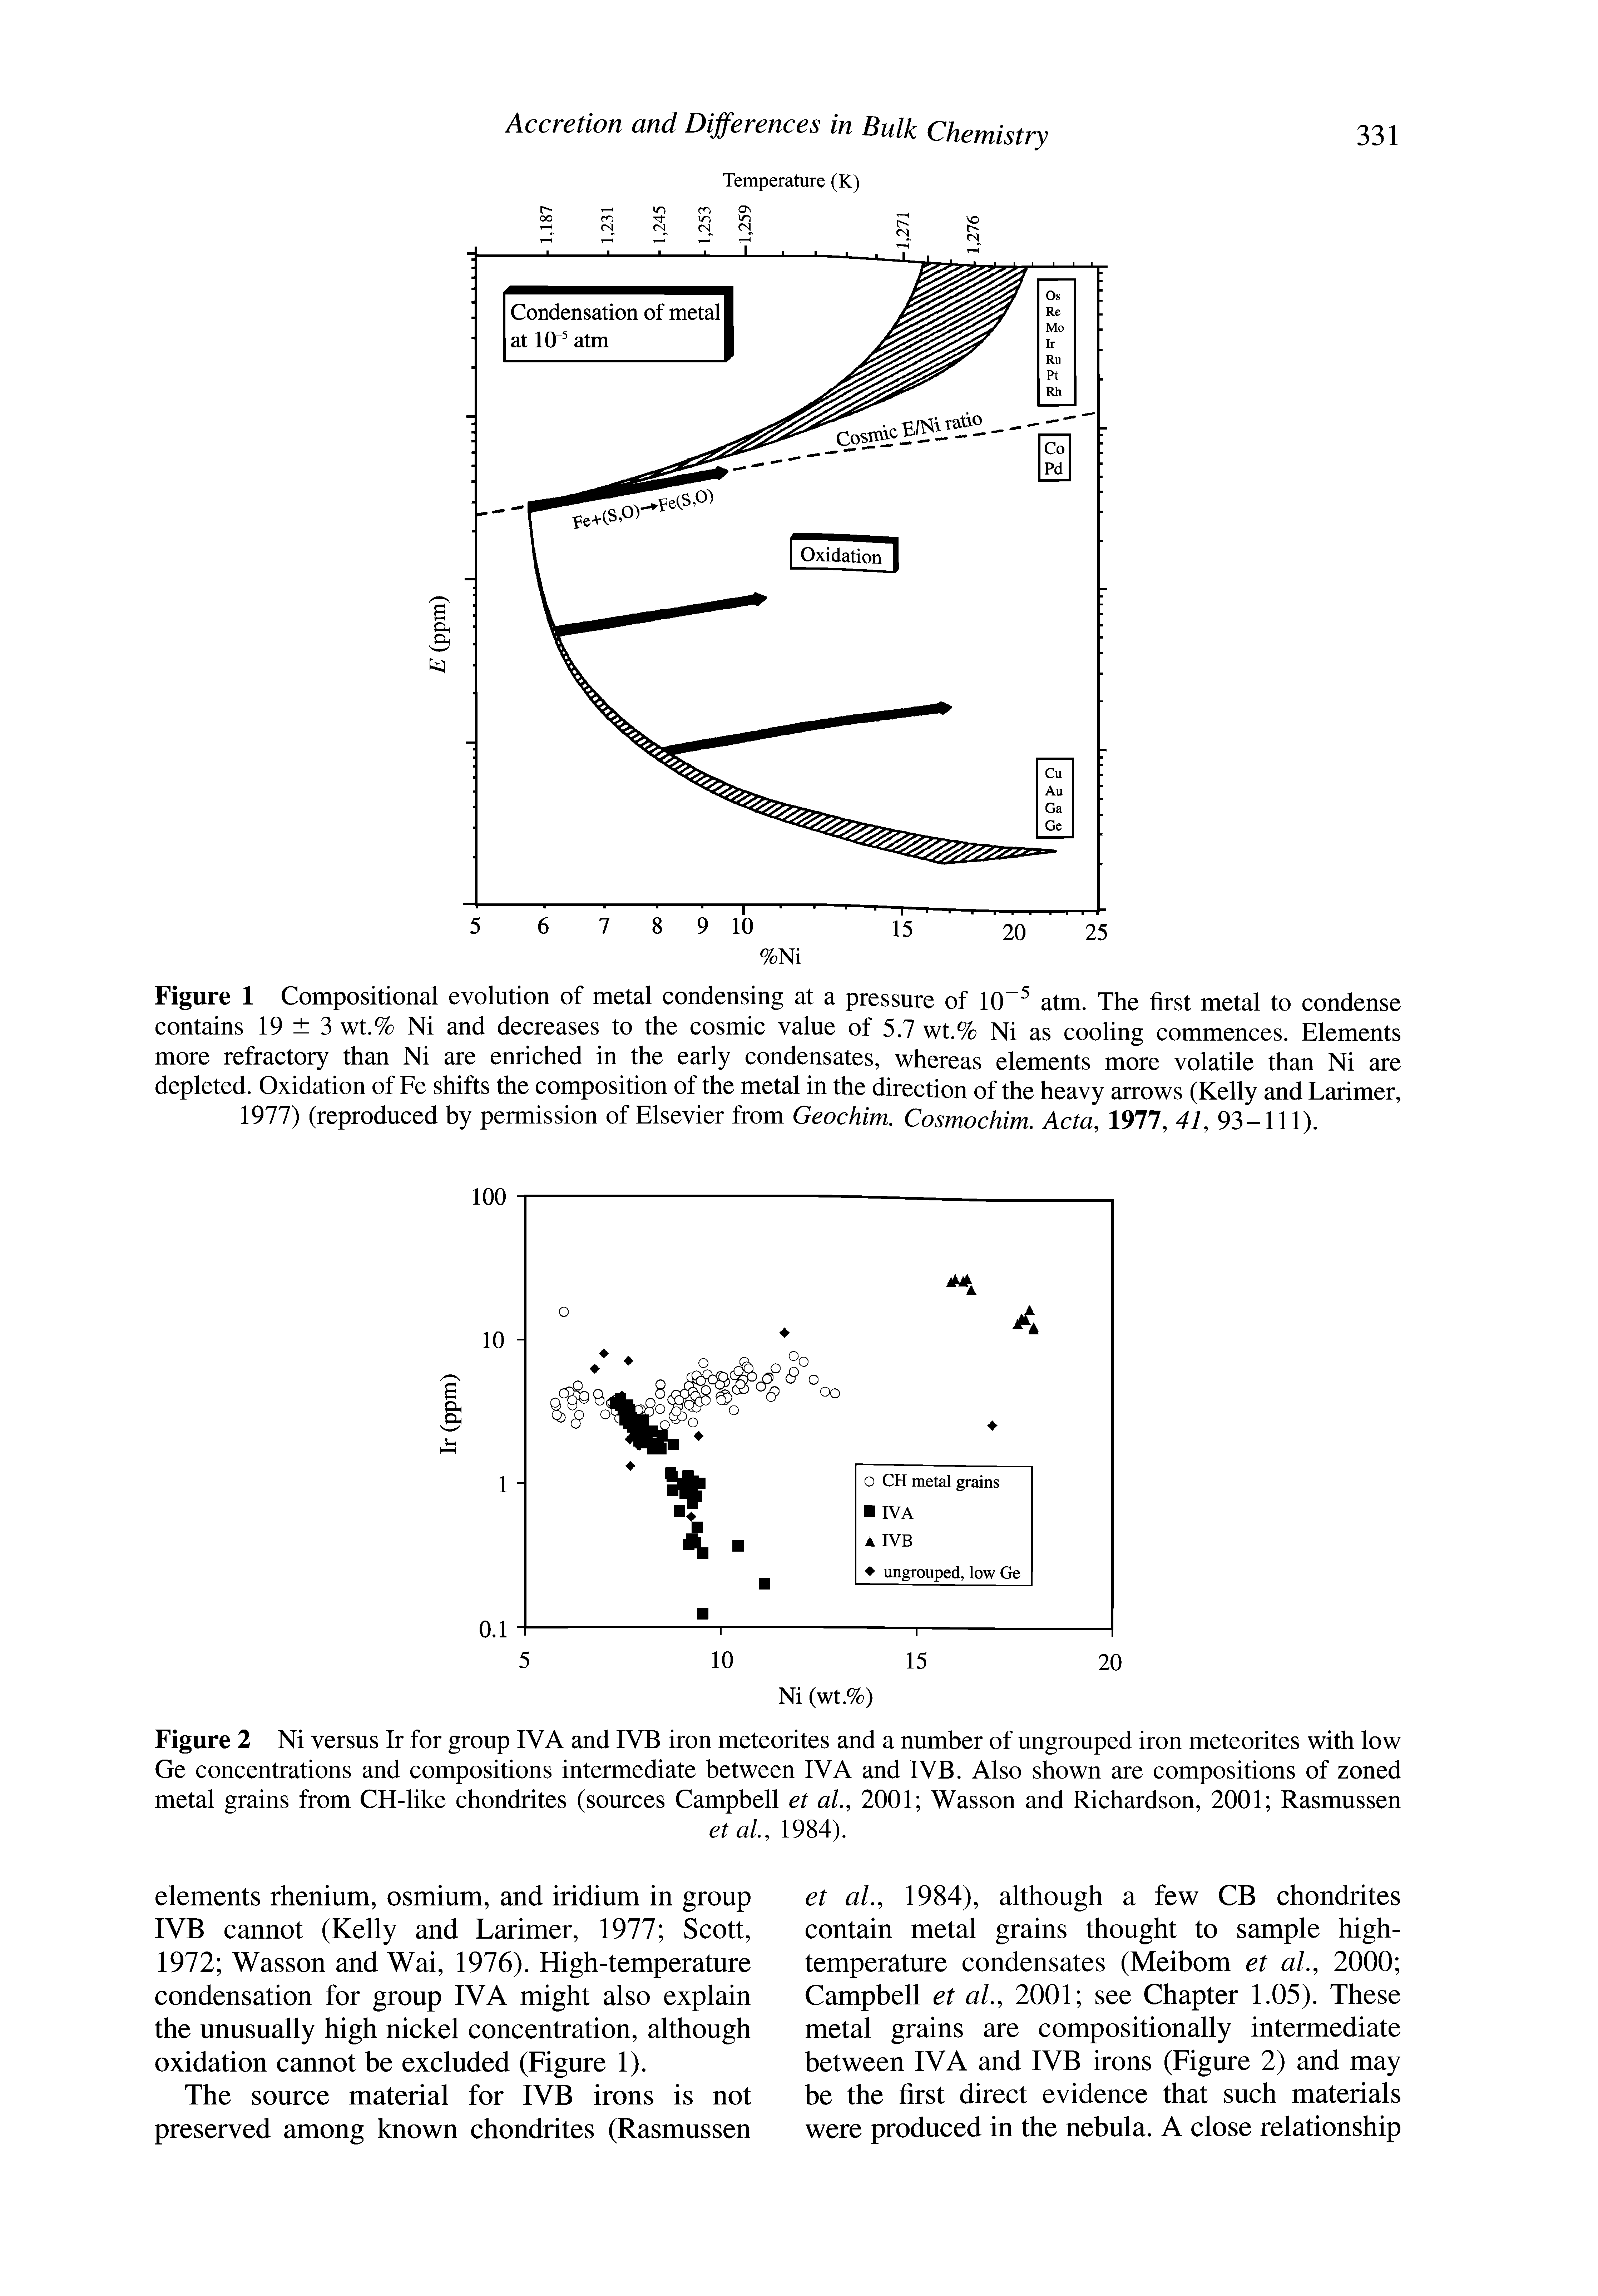 Figure 1 Compositional evolution of metal condensing at a pressure of 10 atm. The first metal to condense contains 19 3 wt.% Ni and decreases to the cosmic value of 5.7 wt.% Ni as cooling commences. Elements more refractory than Ni are enriched in the early condensates, whereas elements more volatile than Ni are depleted. Oxidation of Fe shifts the composition of the metal in the direction of the heavy arrows (Kelly and Larimer, 1977) (reproduced by permission of Elsevier from Geochim. Cosmochim. Acta, 1977, 41, 93-111).